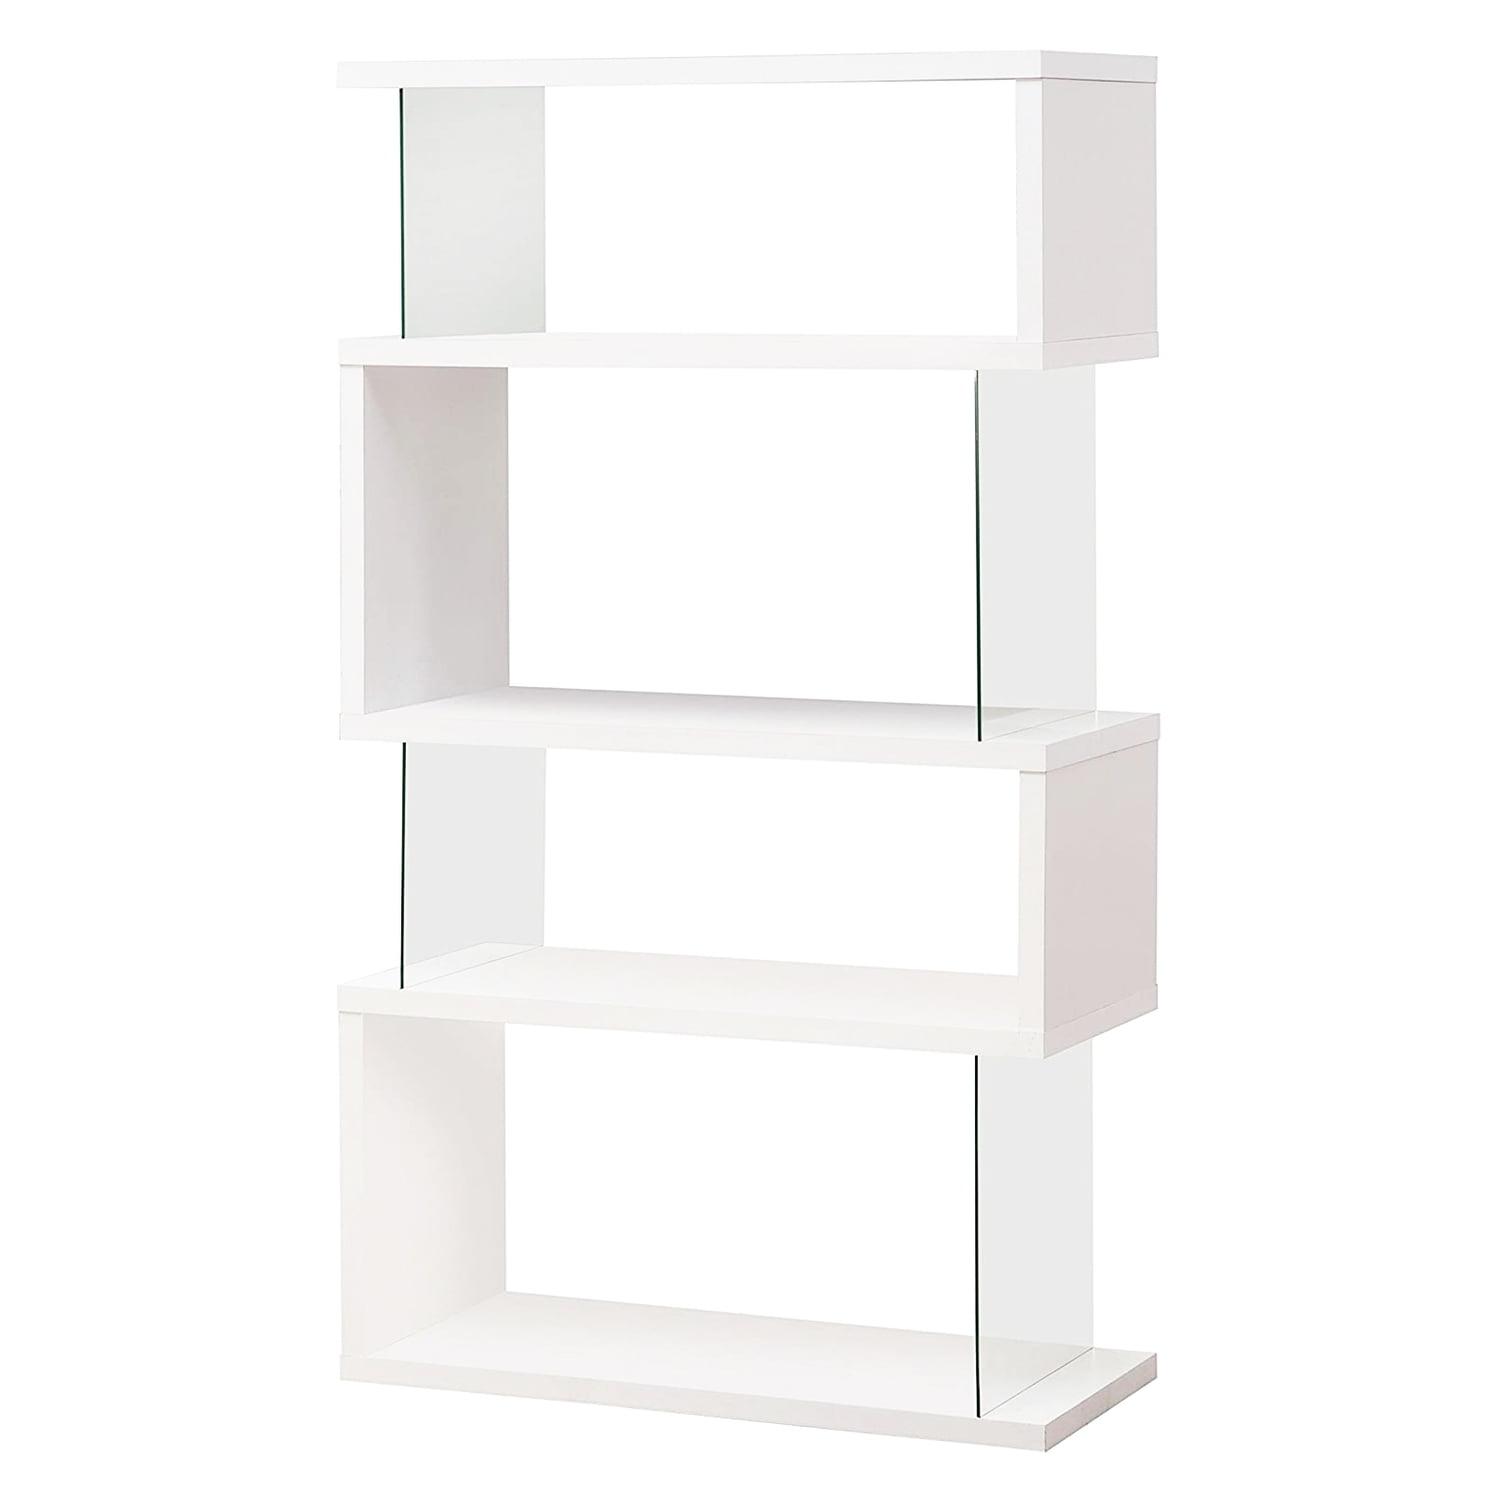 Sophia Glossy White Wooden Kids' Bookcase with Tempered Glass Sides